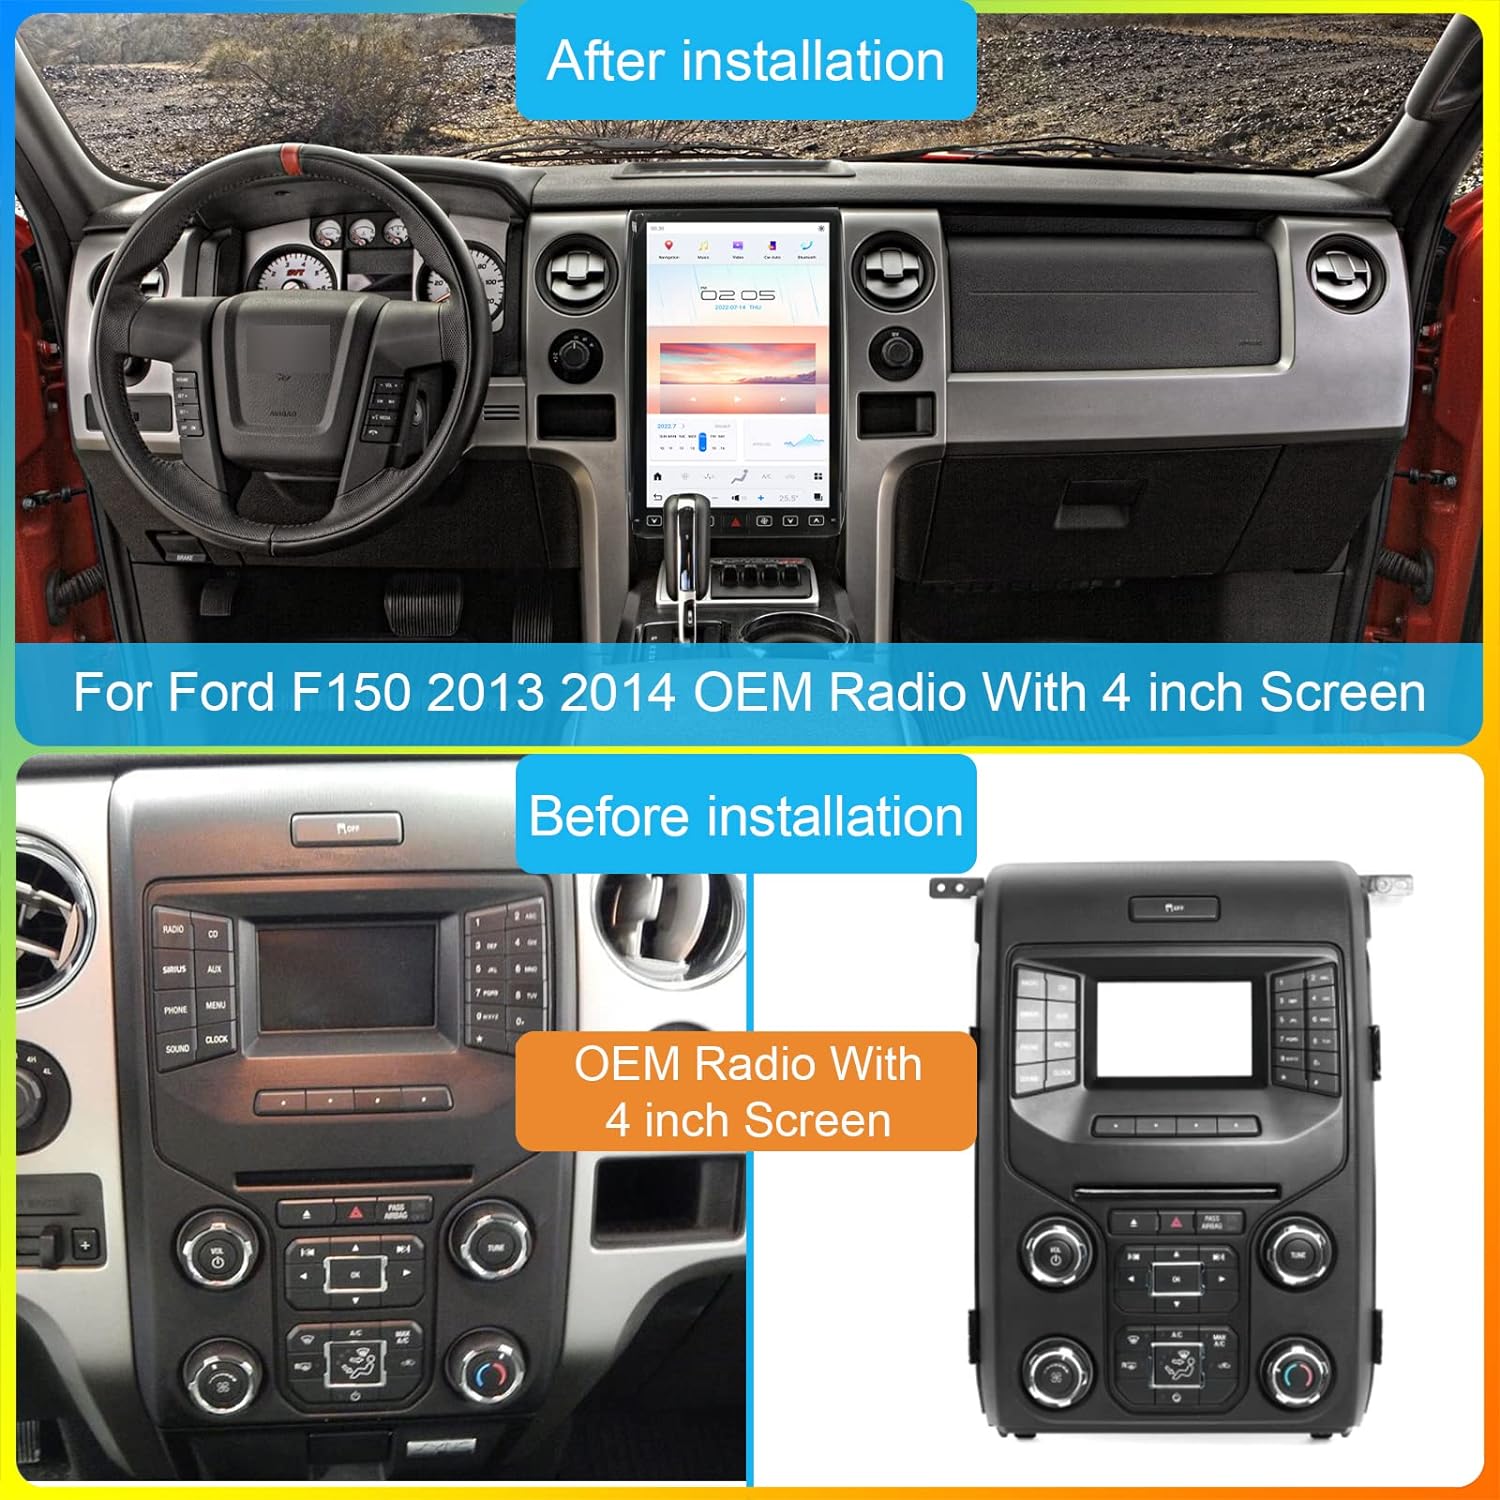 Ford F-150 2009-2014 Stereo Upgrade Tesla-Style Dash IPS Touch Screen Multimedia Player